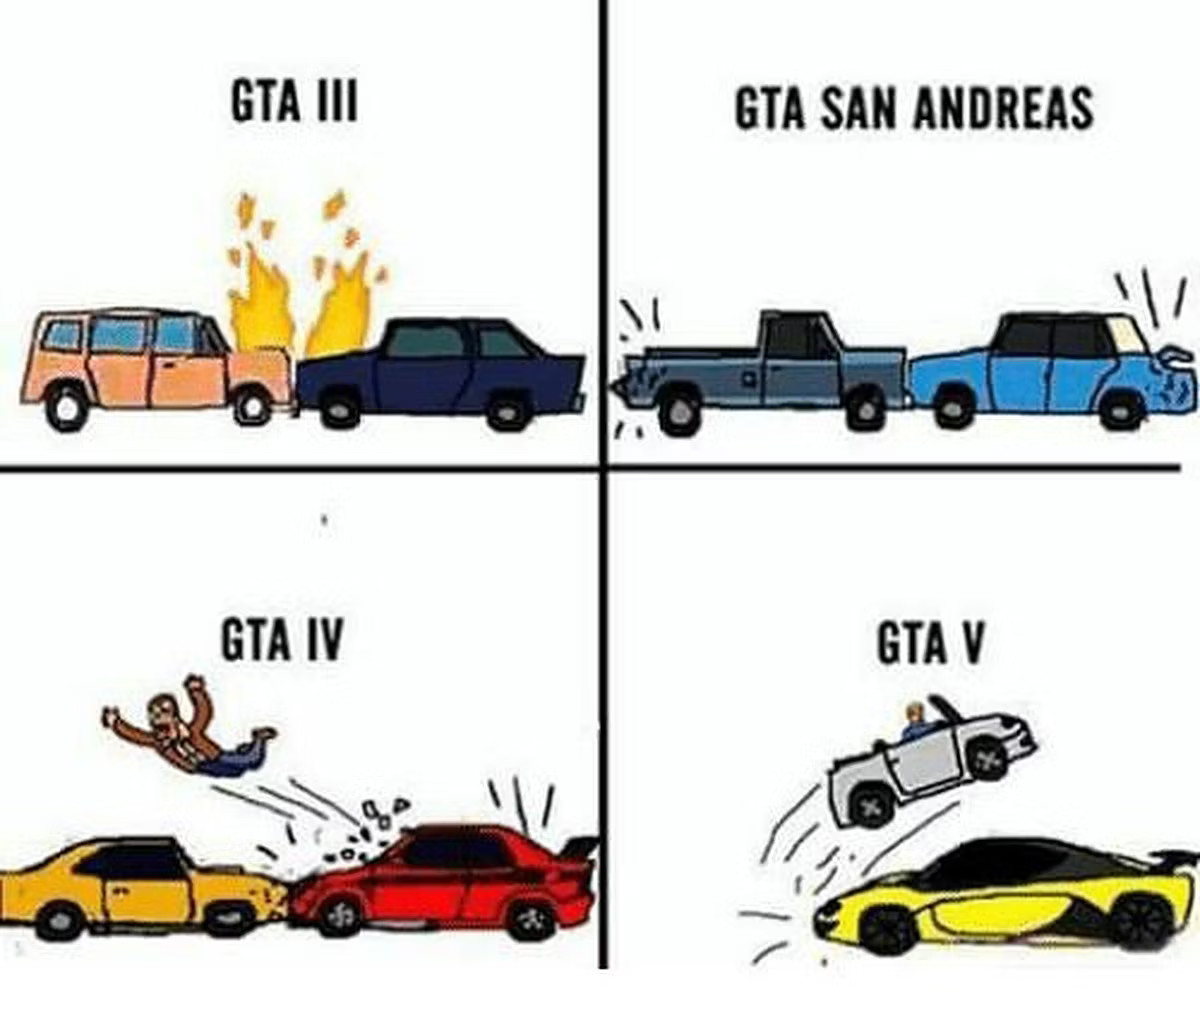 Nothing says #GTA more than the ridiculous car damage over the years...